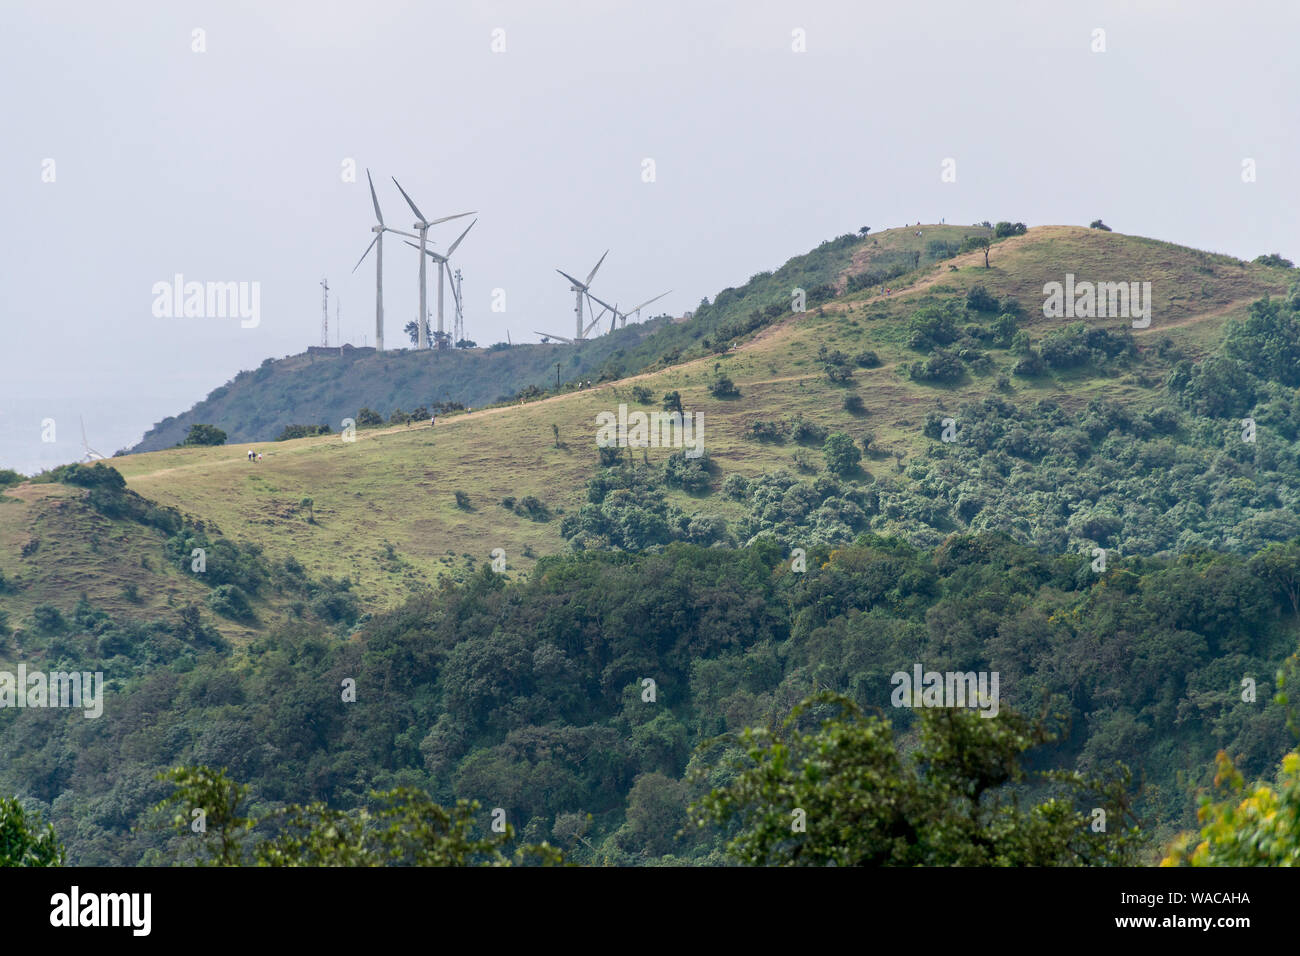 Ngong Hills Nature Reserve with hiking trails and wind power plant turbines in background, Kenya Stock Photo